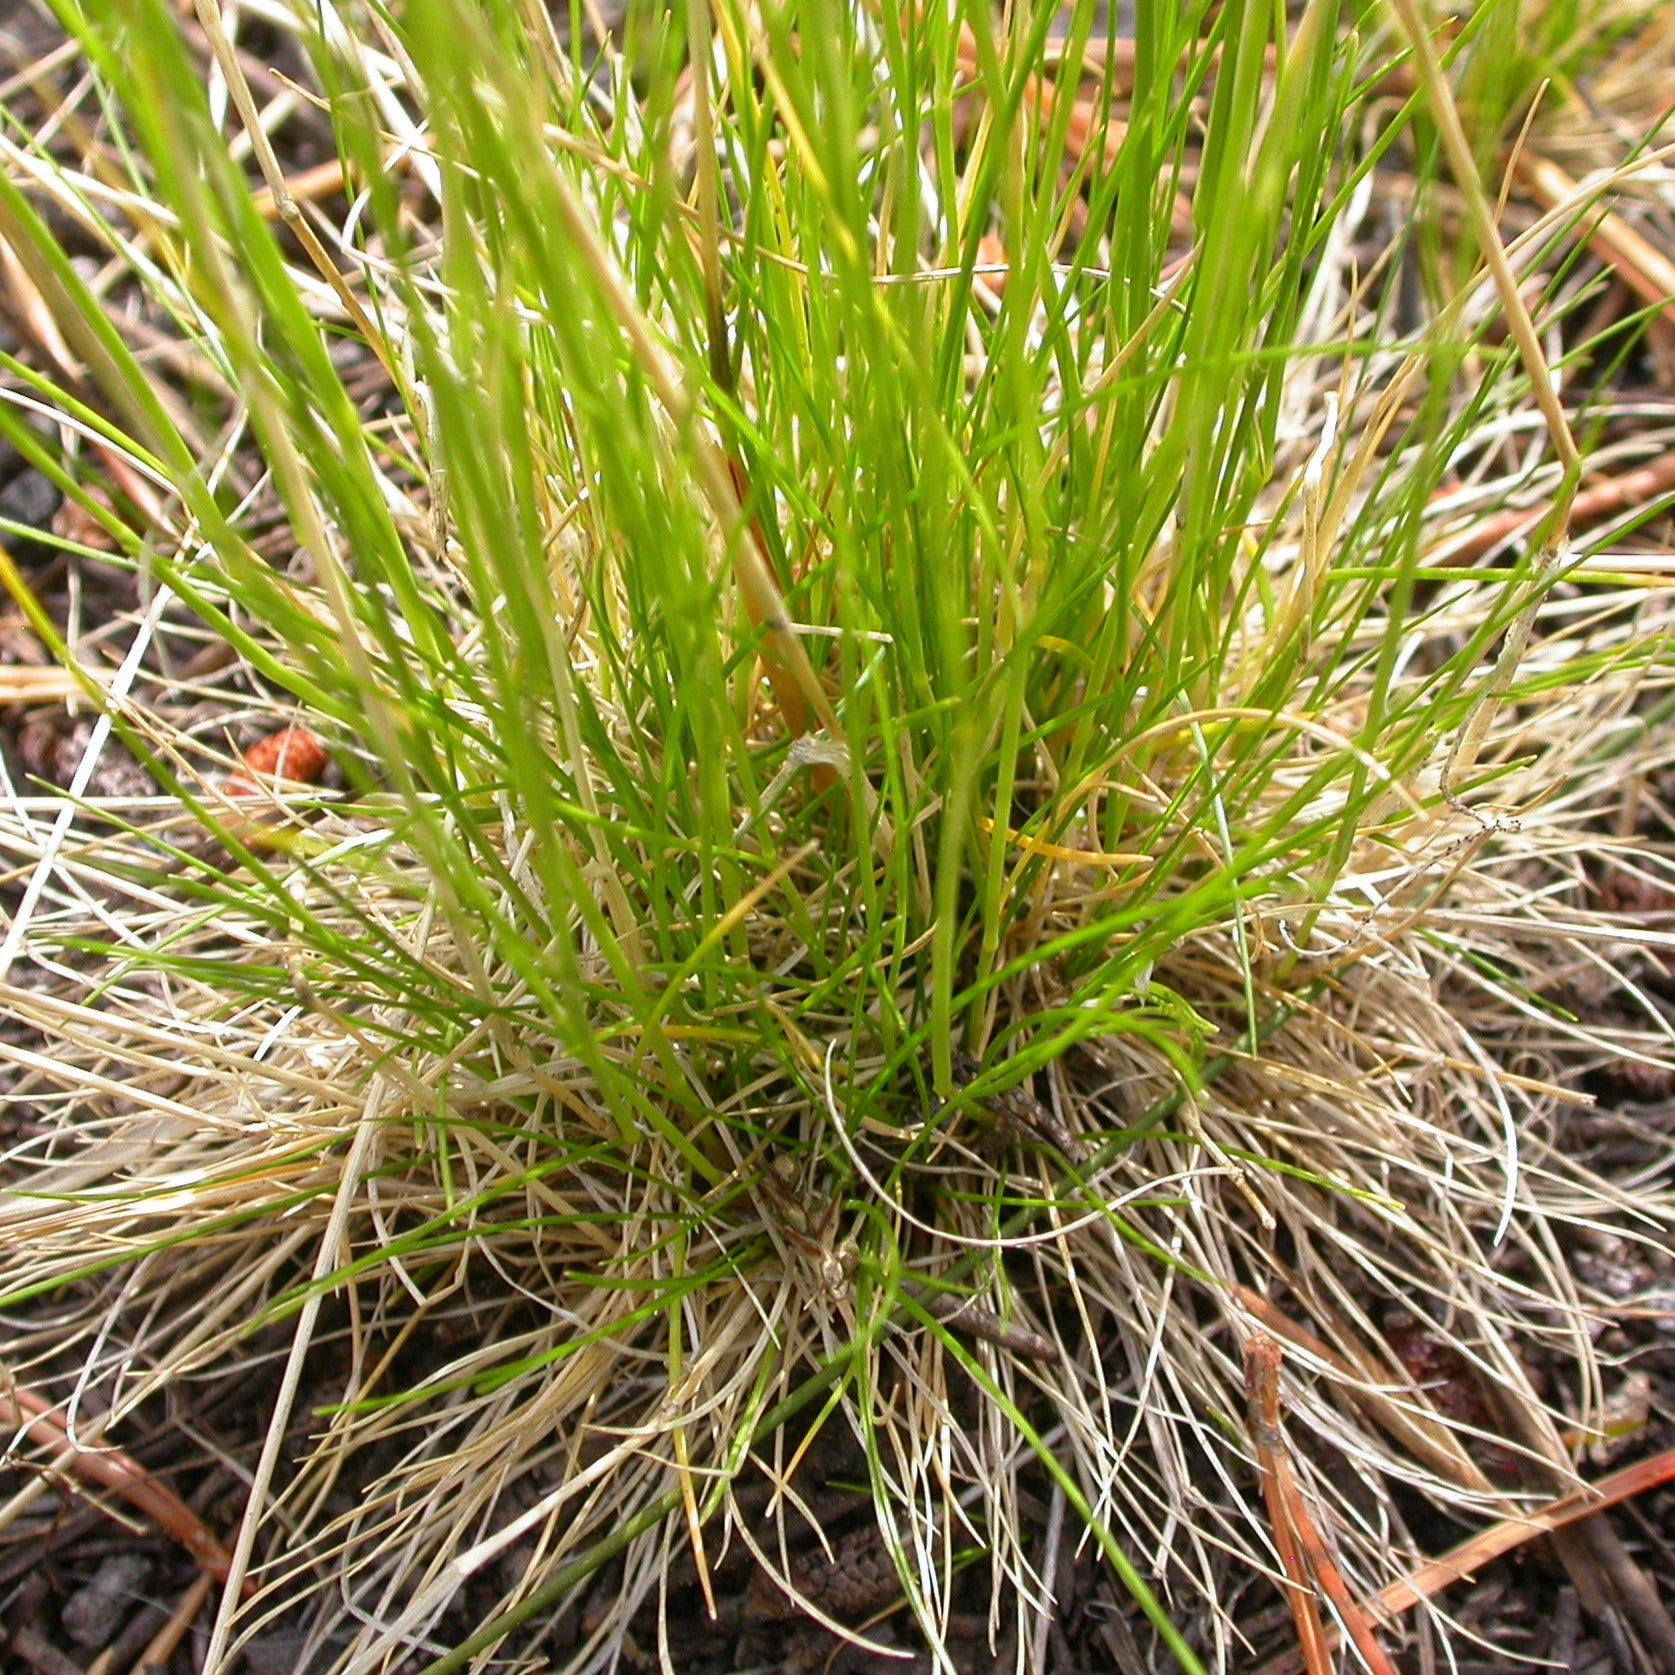 A small tuft of green grass.